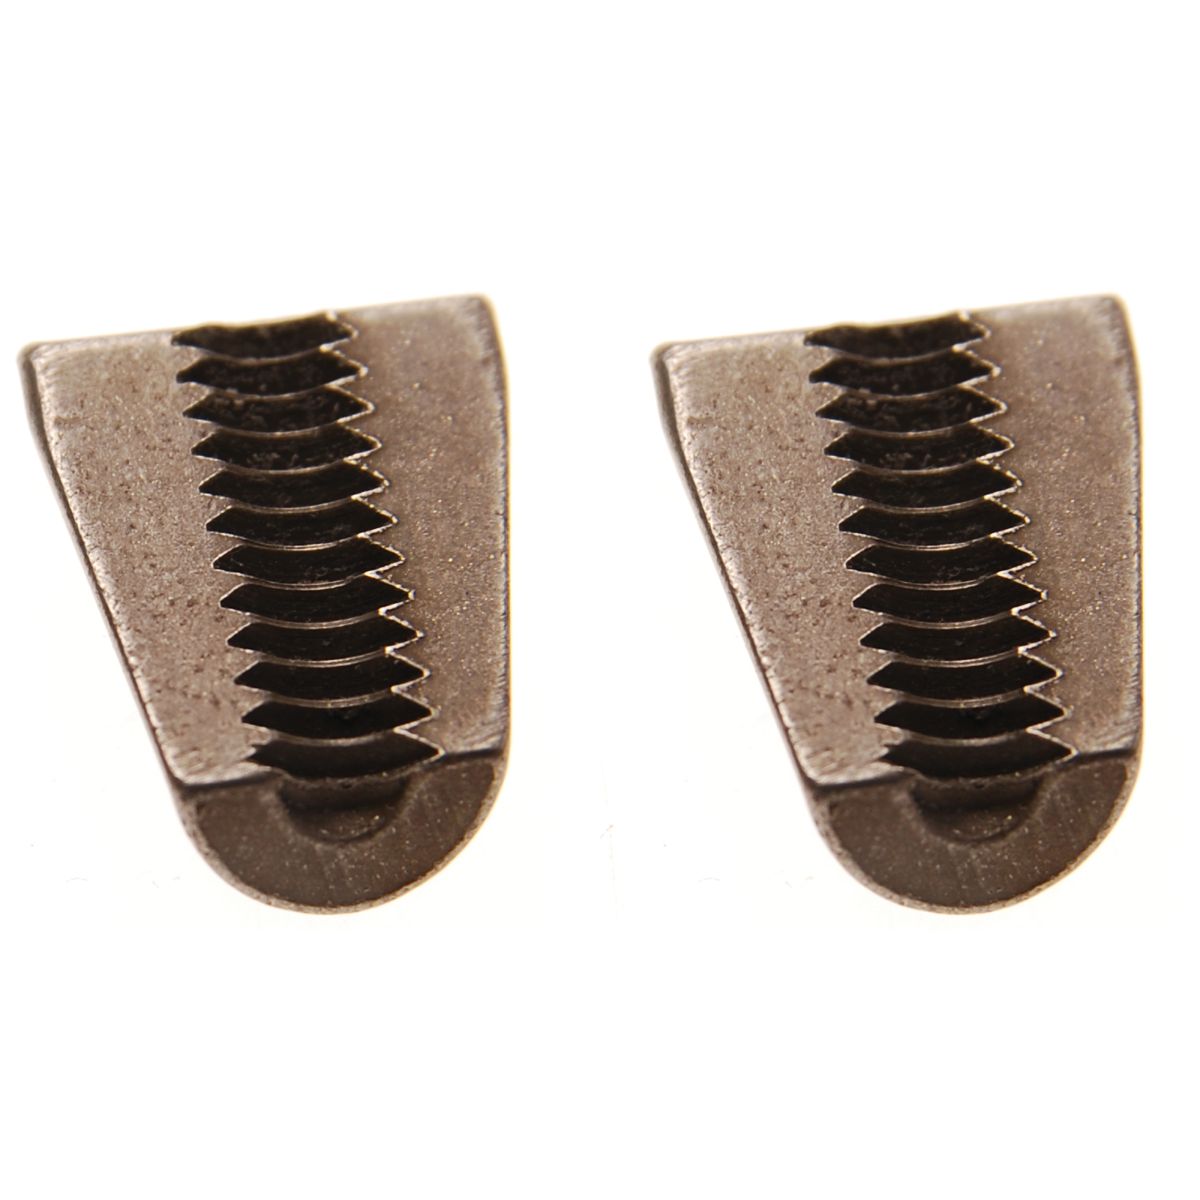 Replacement Pair of Jaws for BGS 405, 3284